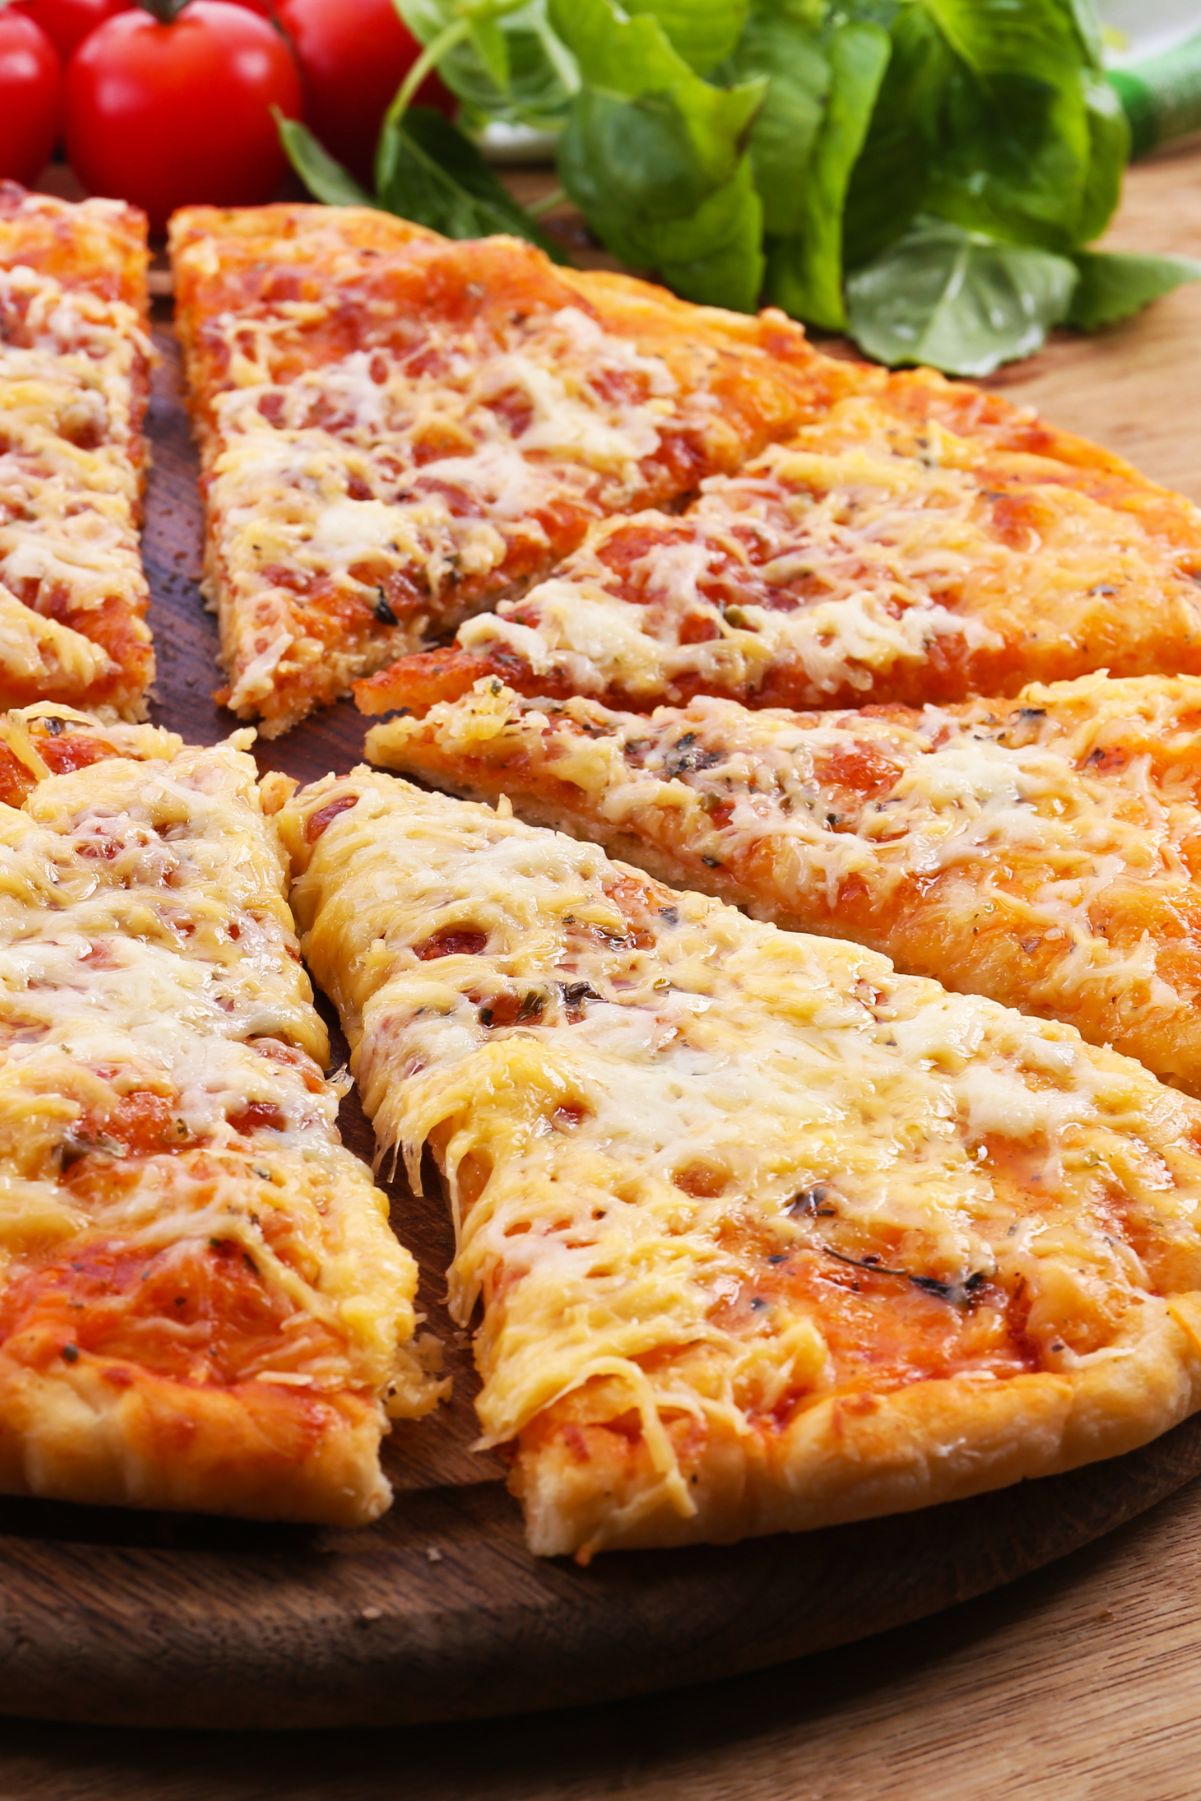 Closeup of sliced Easy Weight Watchers Tomato Pizza.